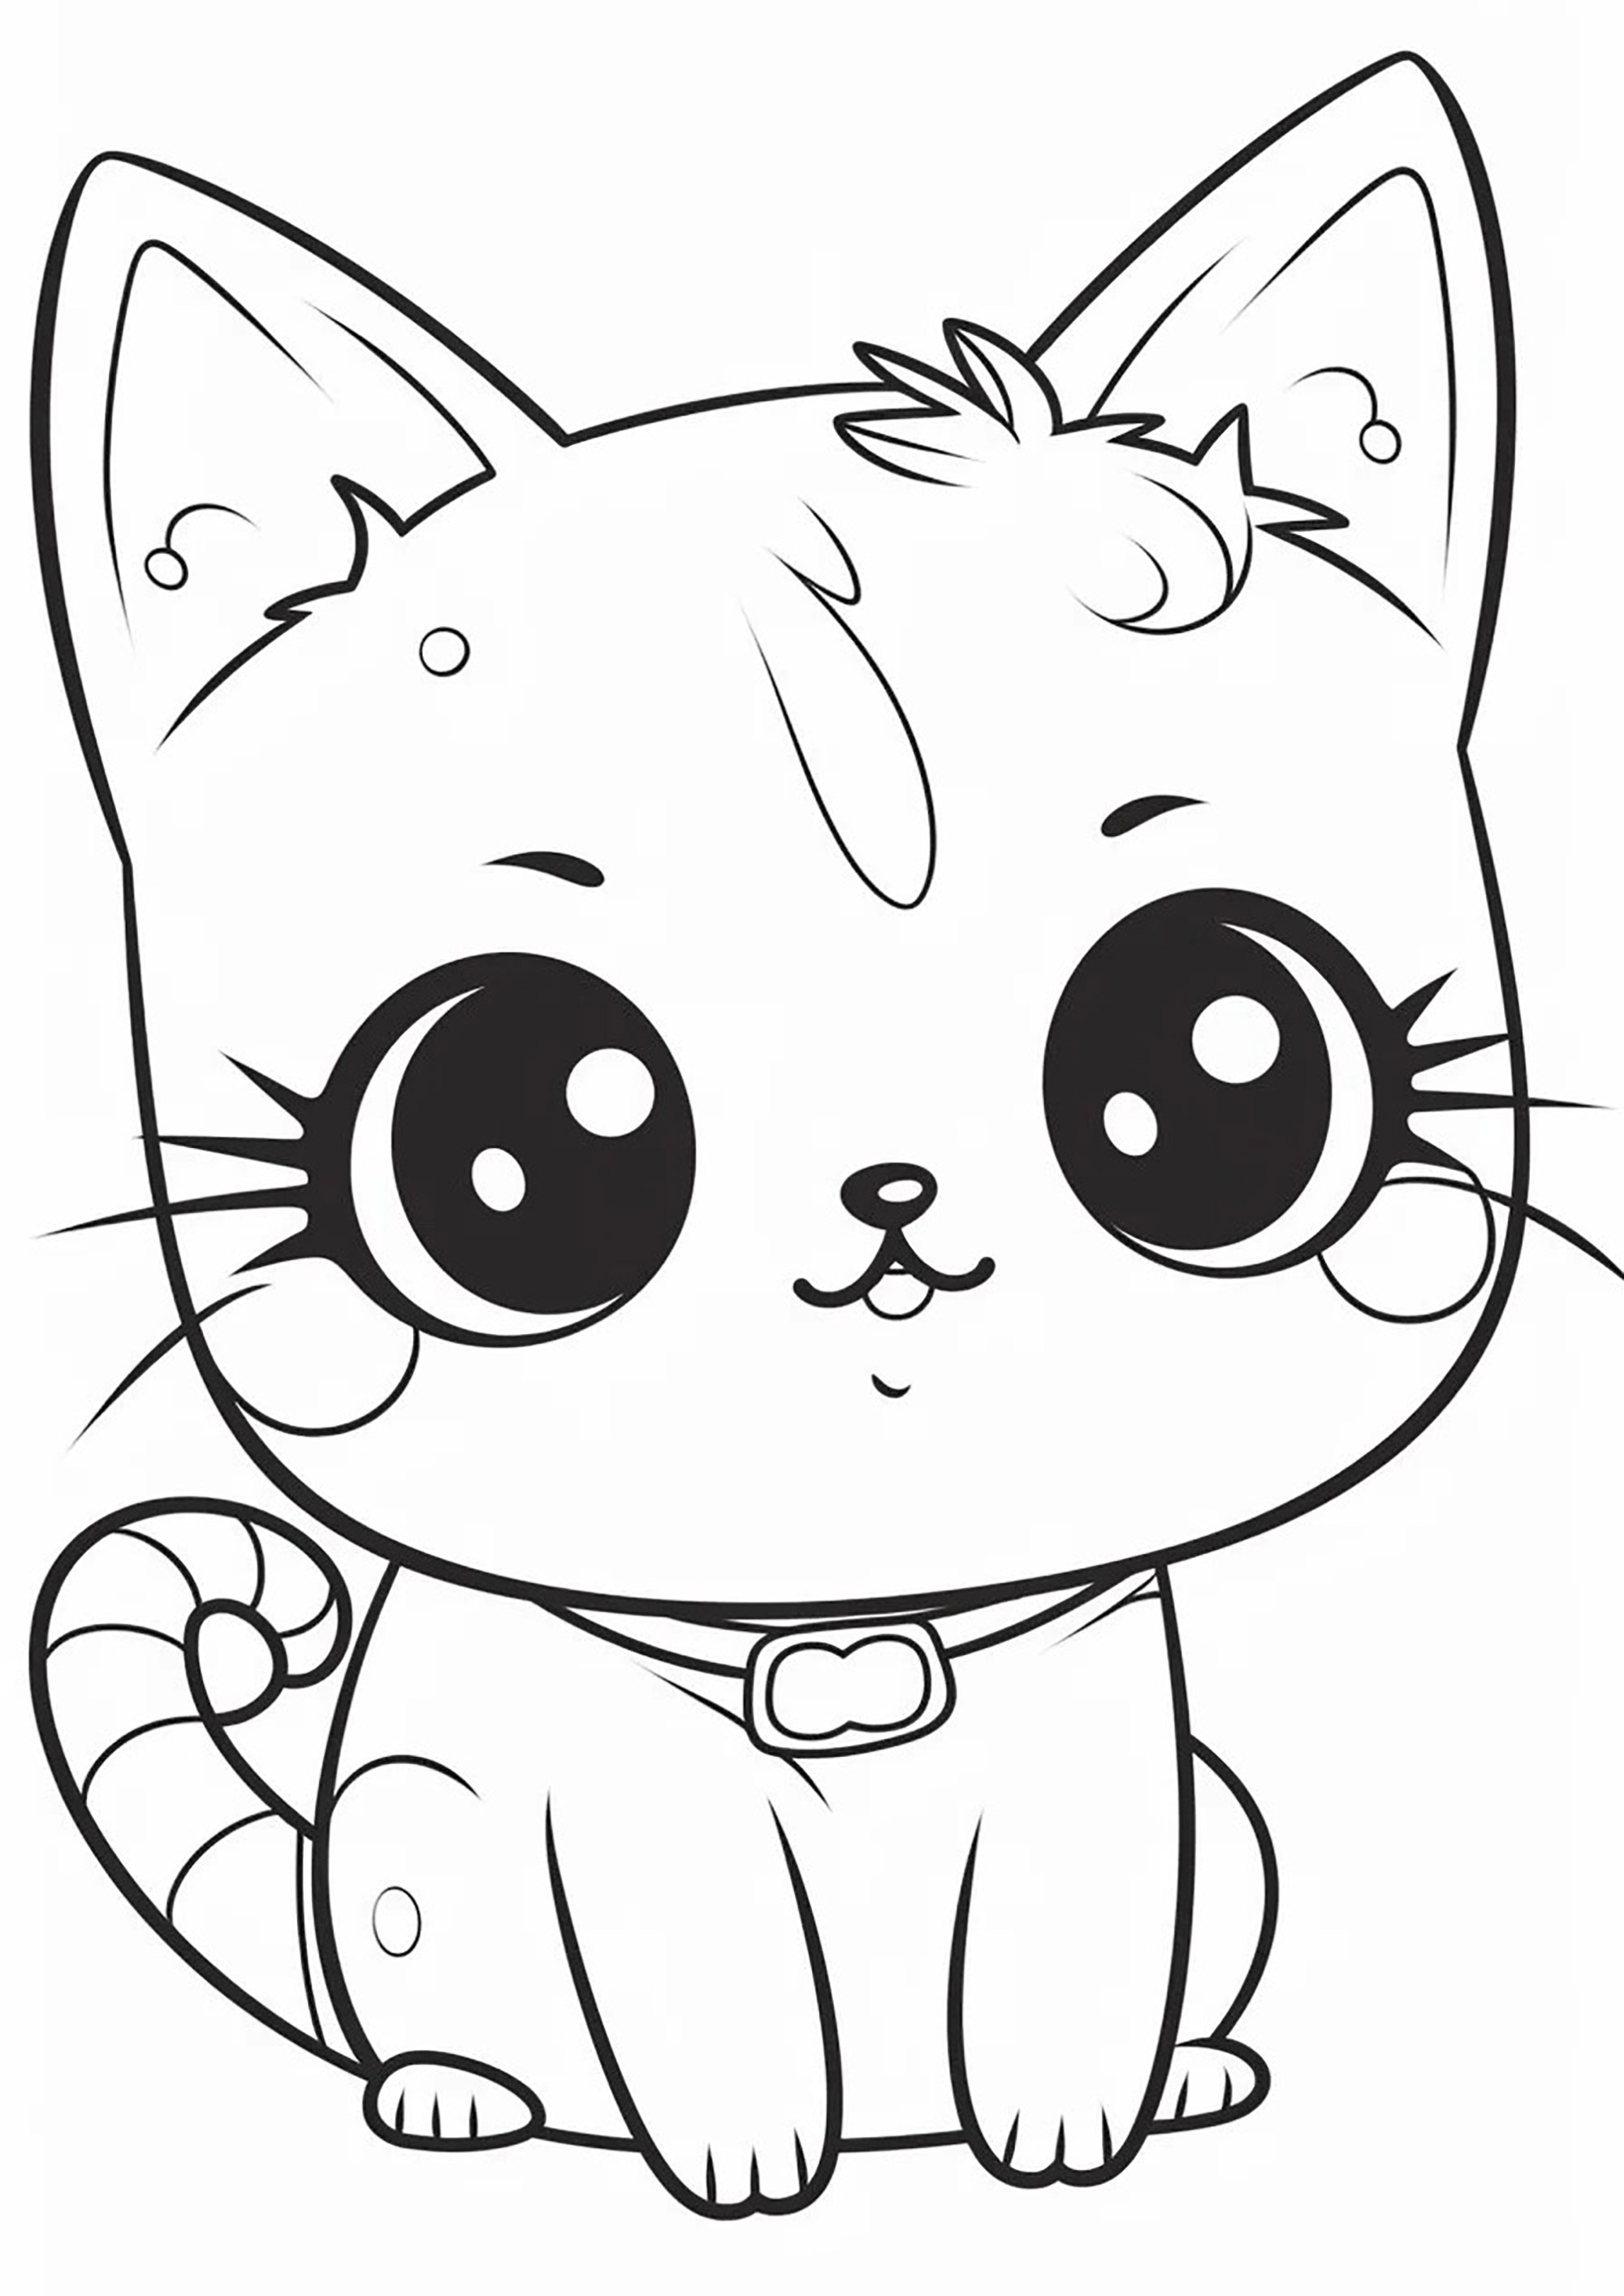 Cute little kitten with big eyes. A blend of Manga and Kawaii styles